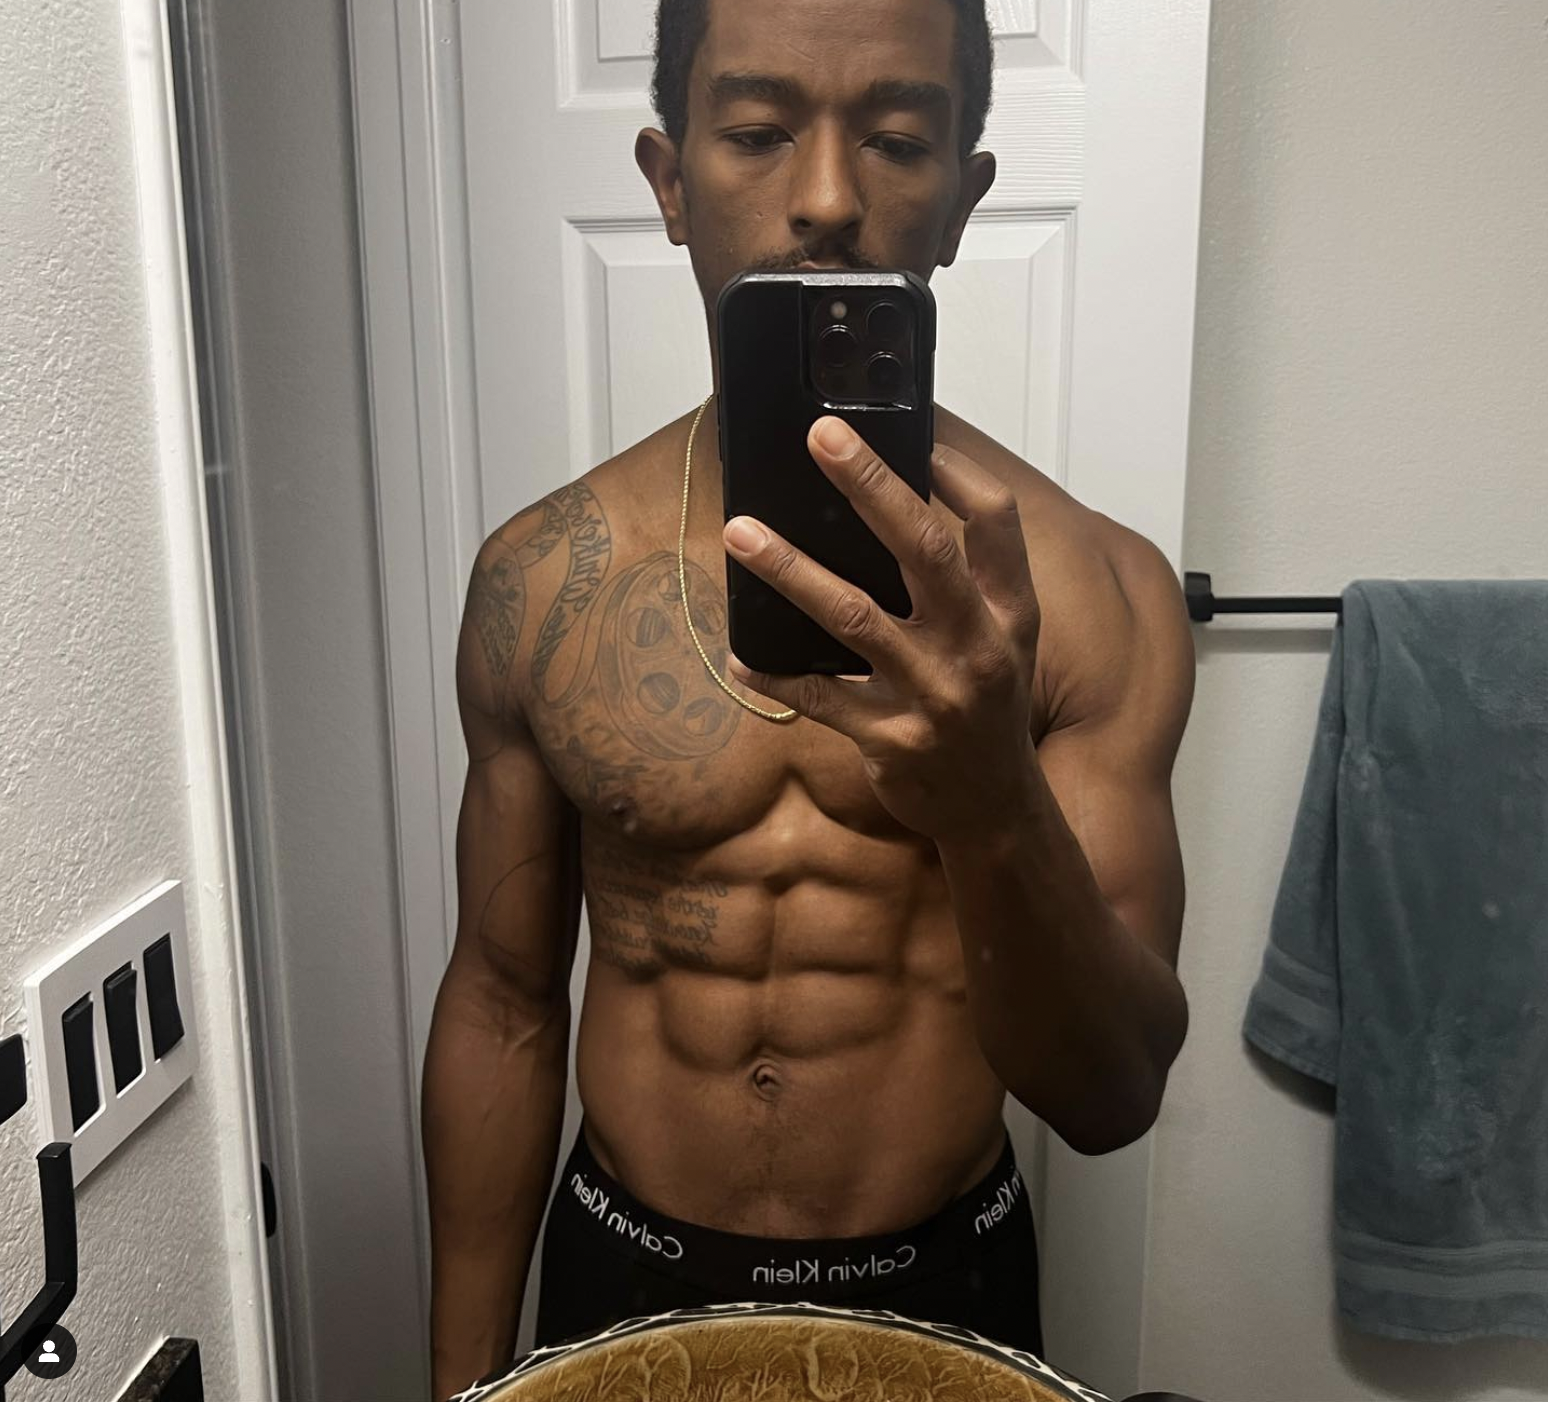 Kevin L. Walker Amazing body and adonis figure